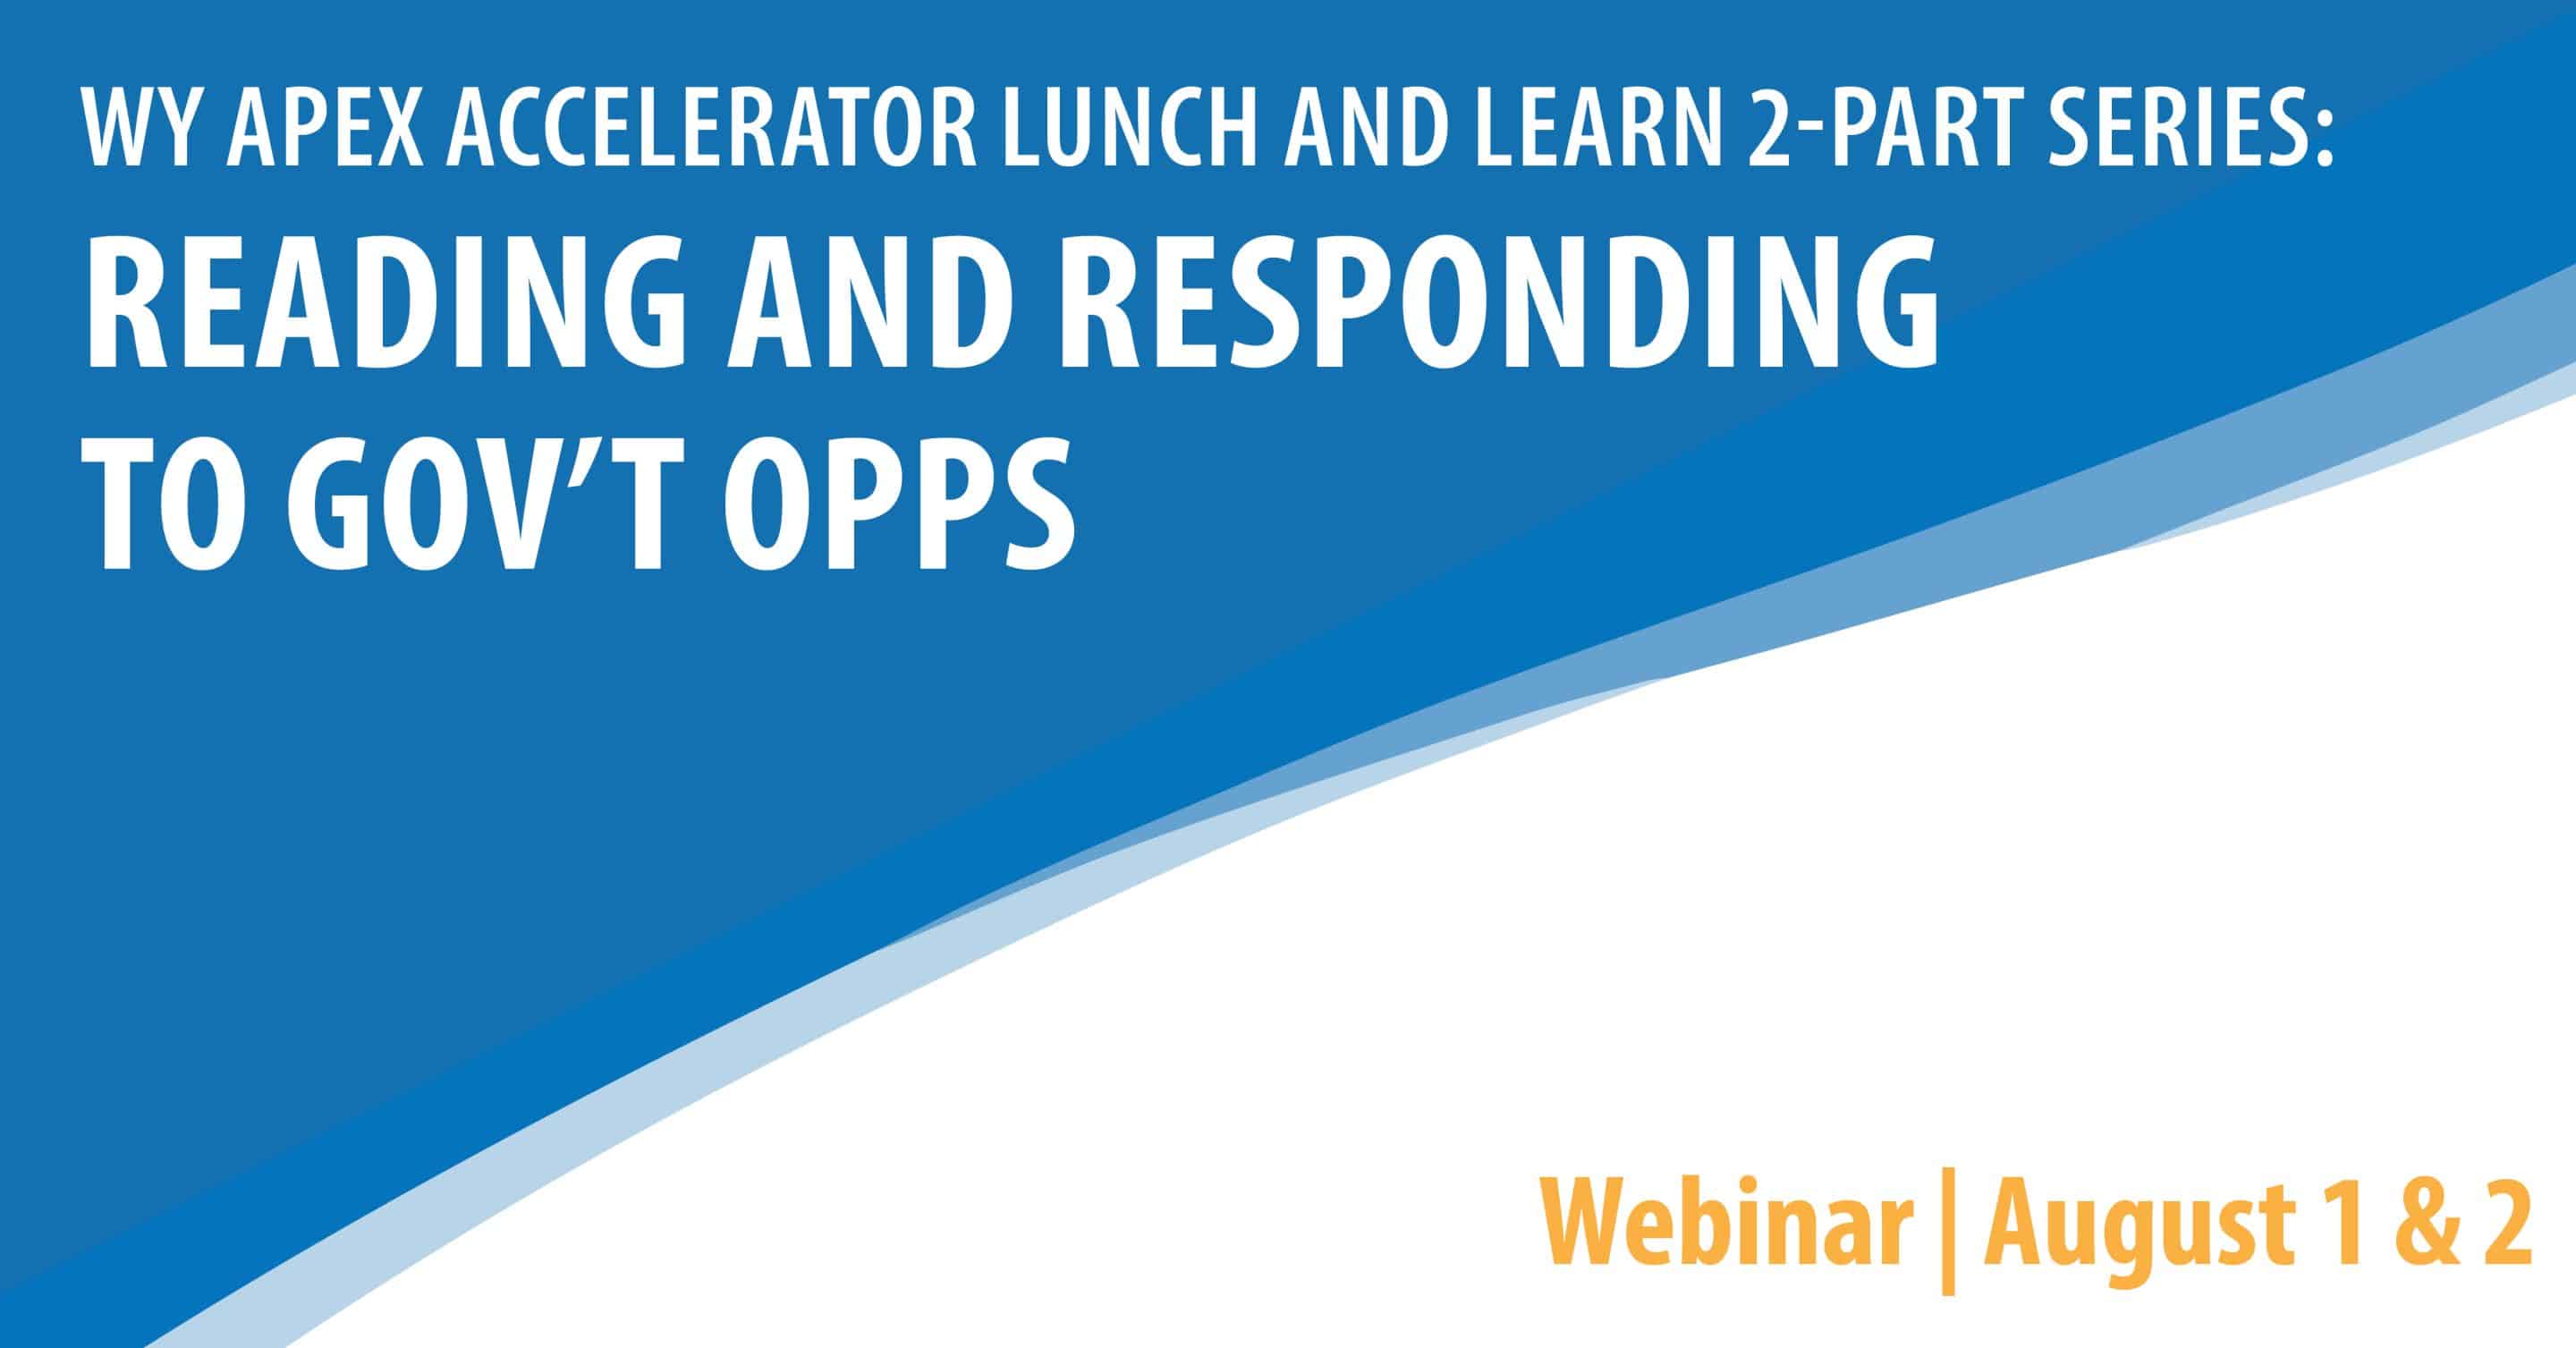 APEX Accelerator Lunch & Learn 2-Part Series: Reading and Responding to Government Opp's